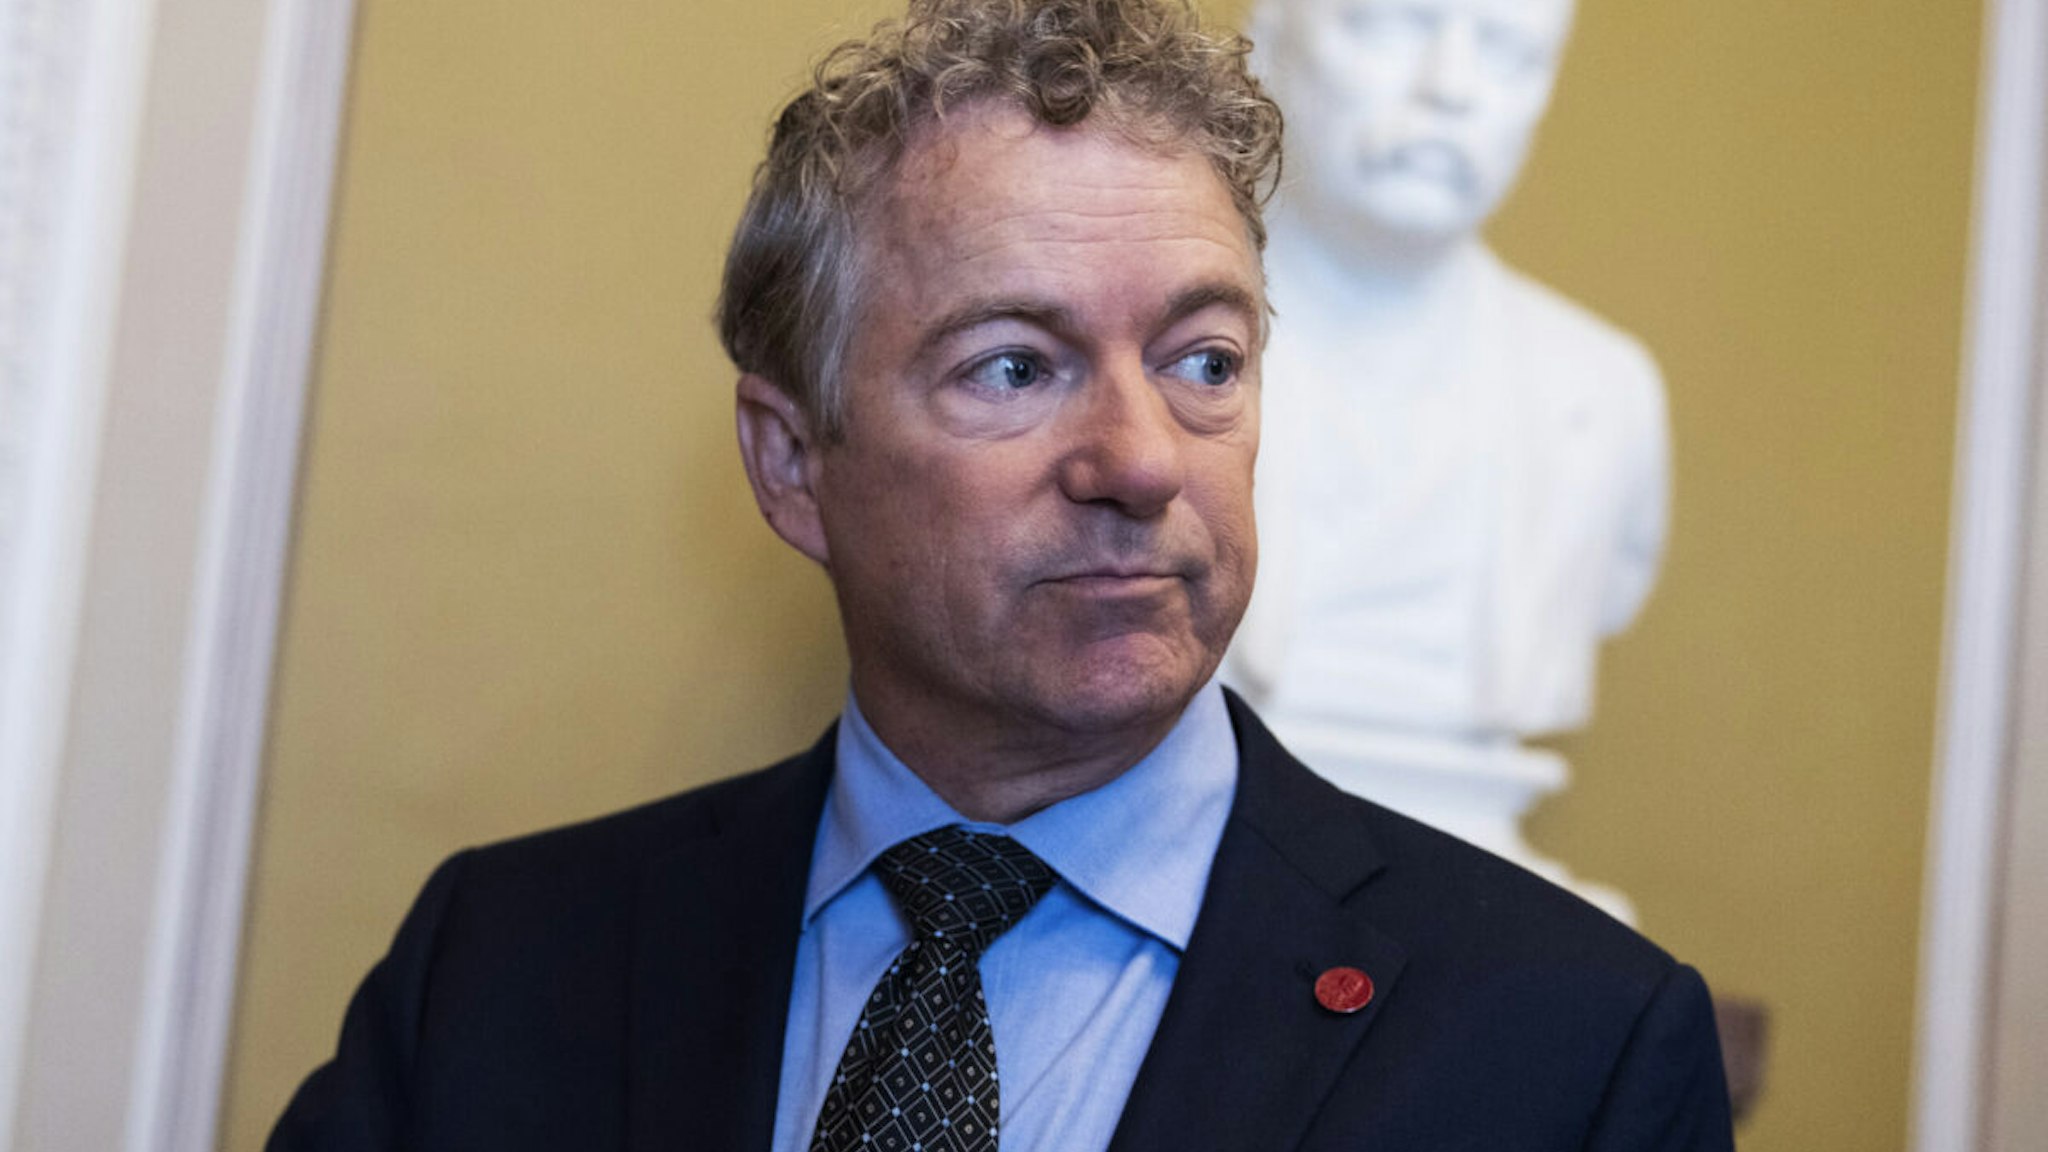 Sen. Rand Paul, R-Ky., talks with a reporter in the U.S. Capitol on Tuesday, November 15, 2022.